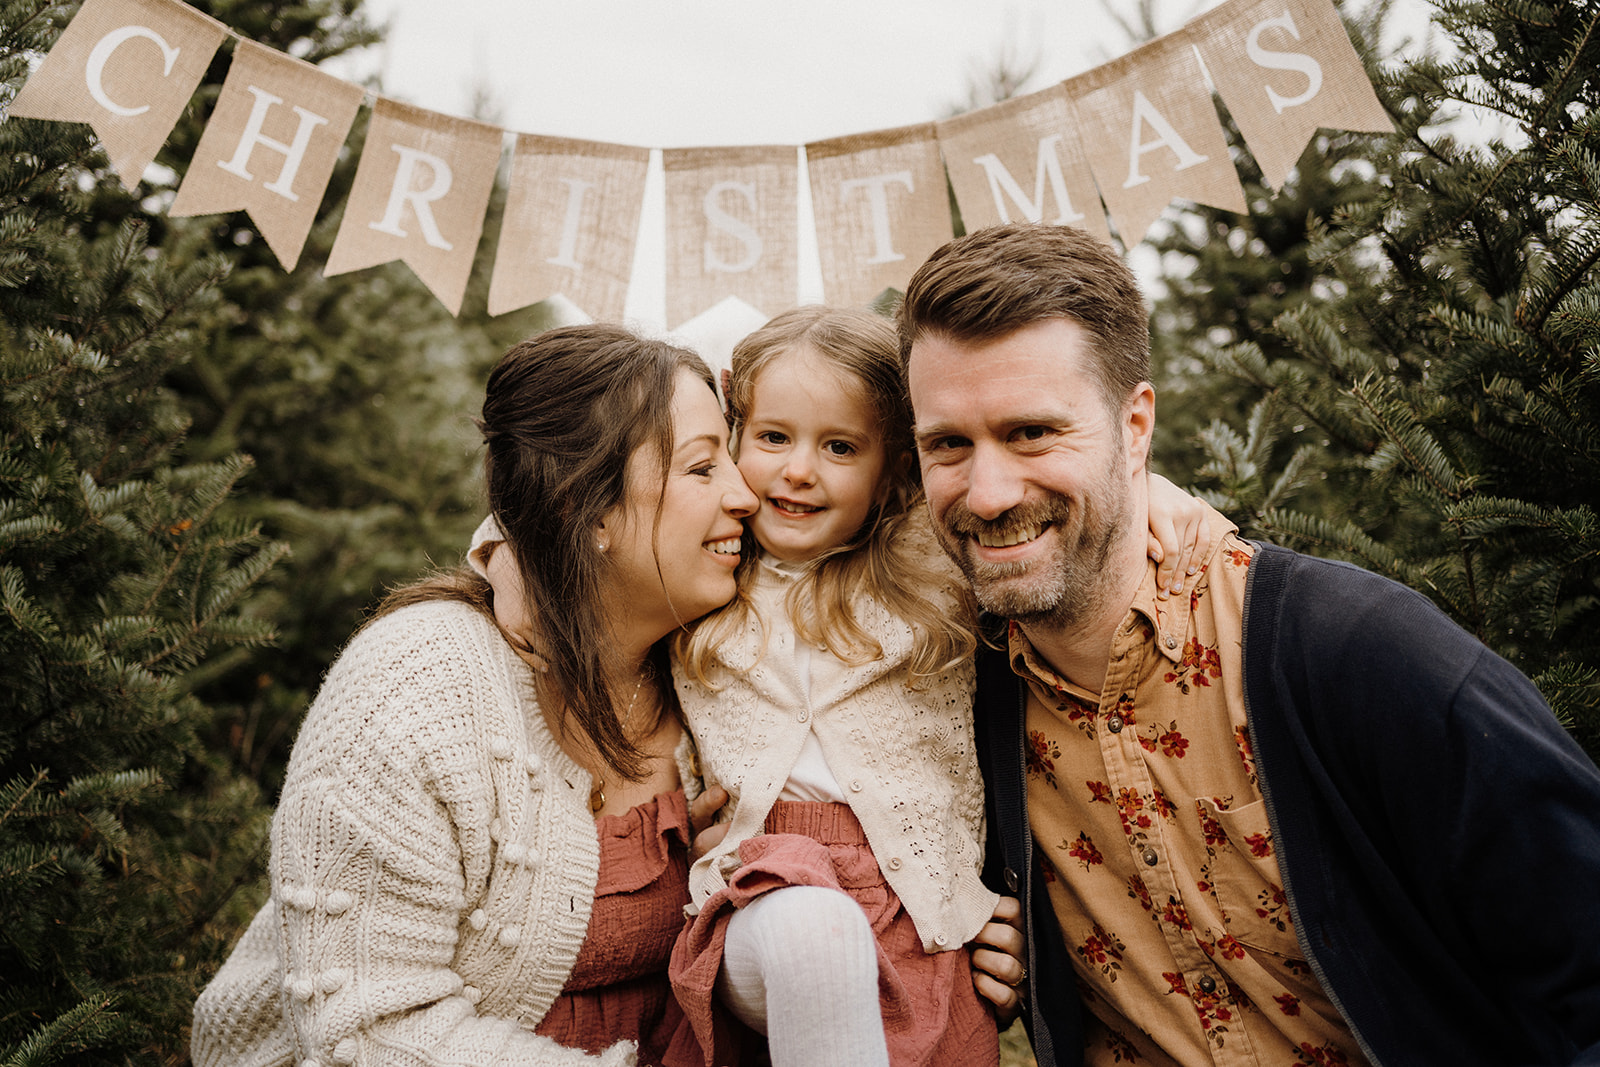 A family of three underneath a 'Merry Christmas' banner.